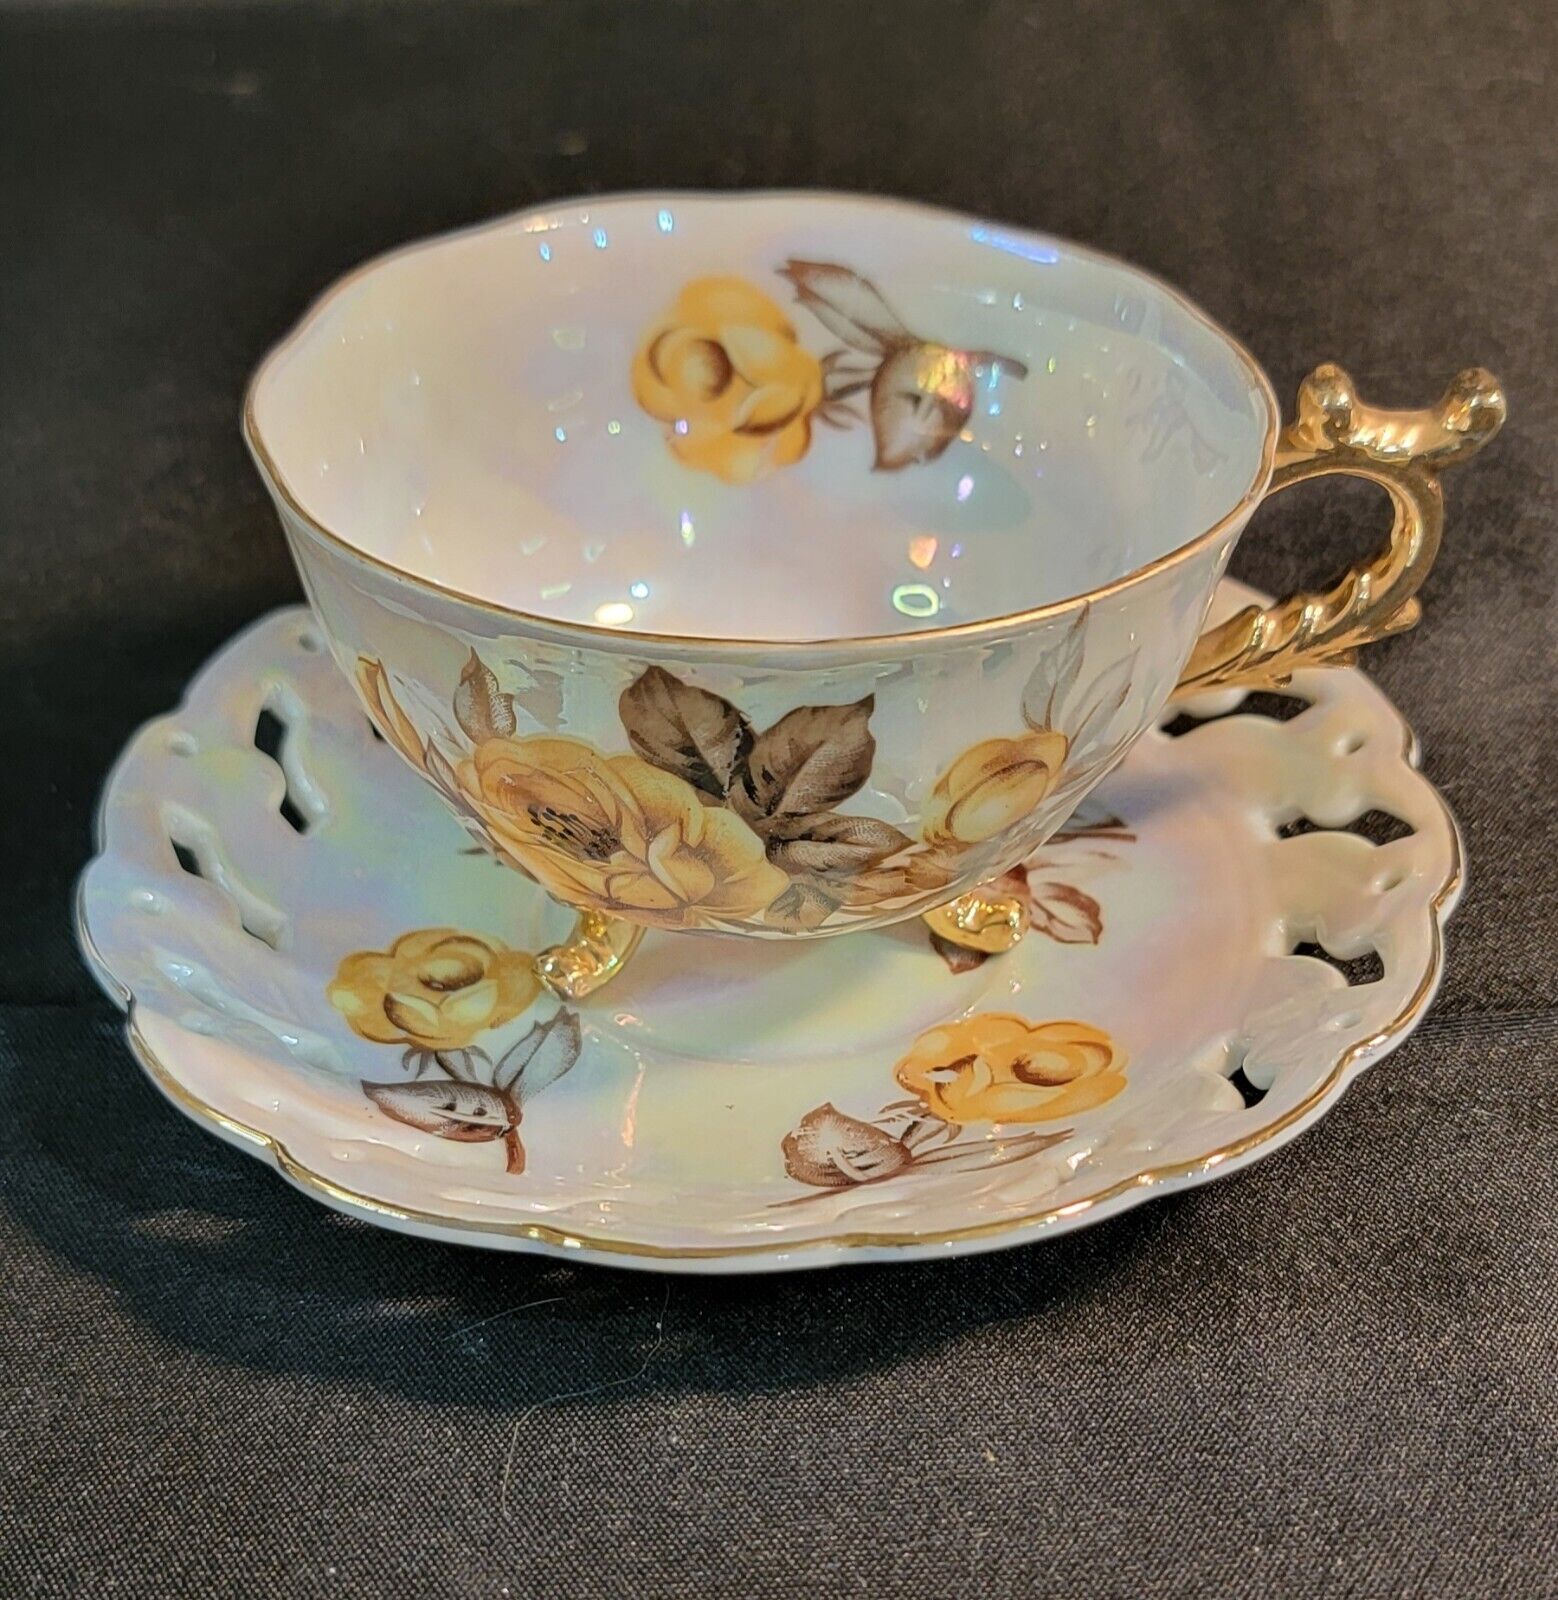 Vtg Ucagco Japan Iridescent Teacup & Saucer Yellow Roses Gold Trim Hand Painted